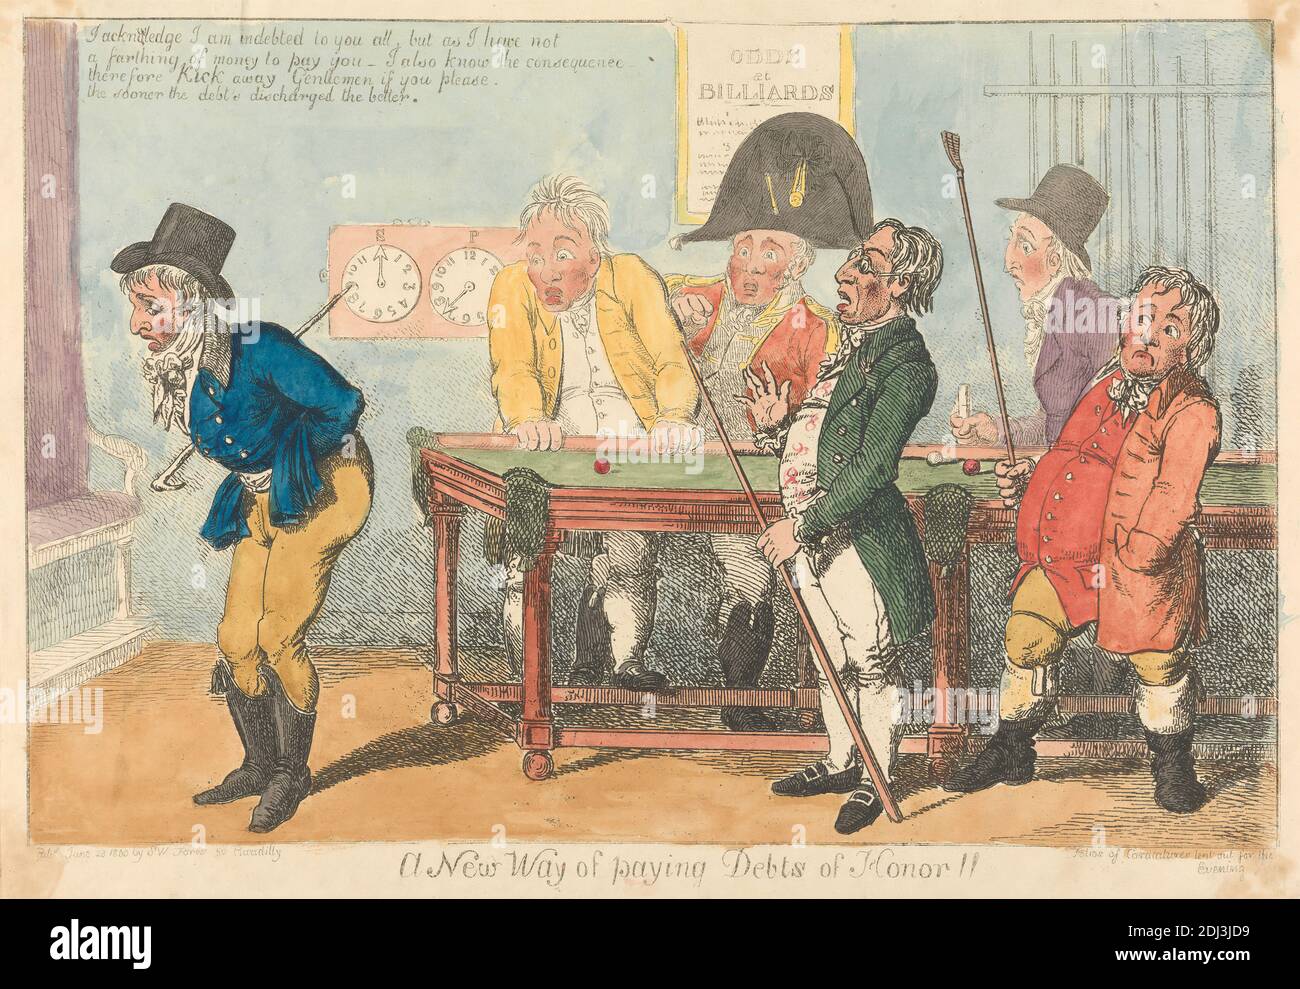 A New Way of Paying Debts of Honor!!, Charles Ansell, ca.1752–active 1790, British, 1799, Etching, hand-colored, Sheet: 9 3/4 x 13 1/8in. (24.8 x 33.3cm Stock Photo